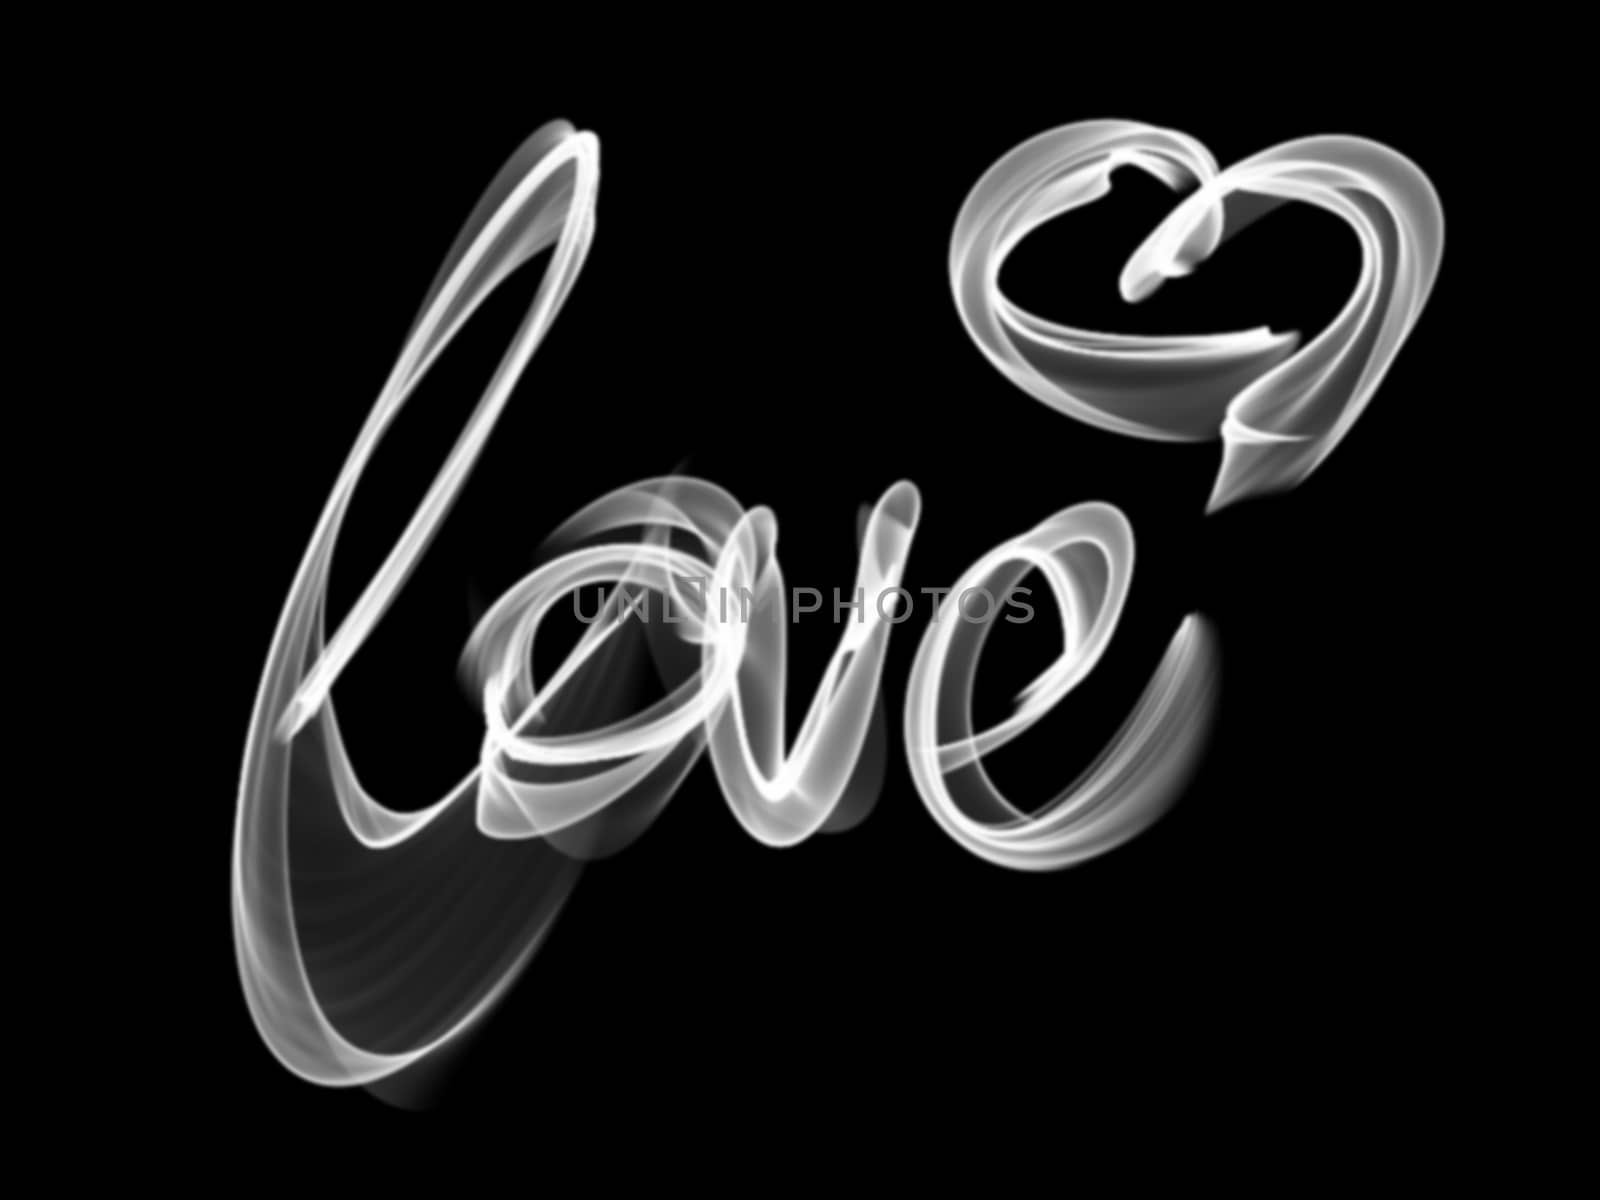 Love isolated word lettering and heart written with fire flame or smoke on black background.